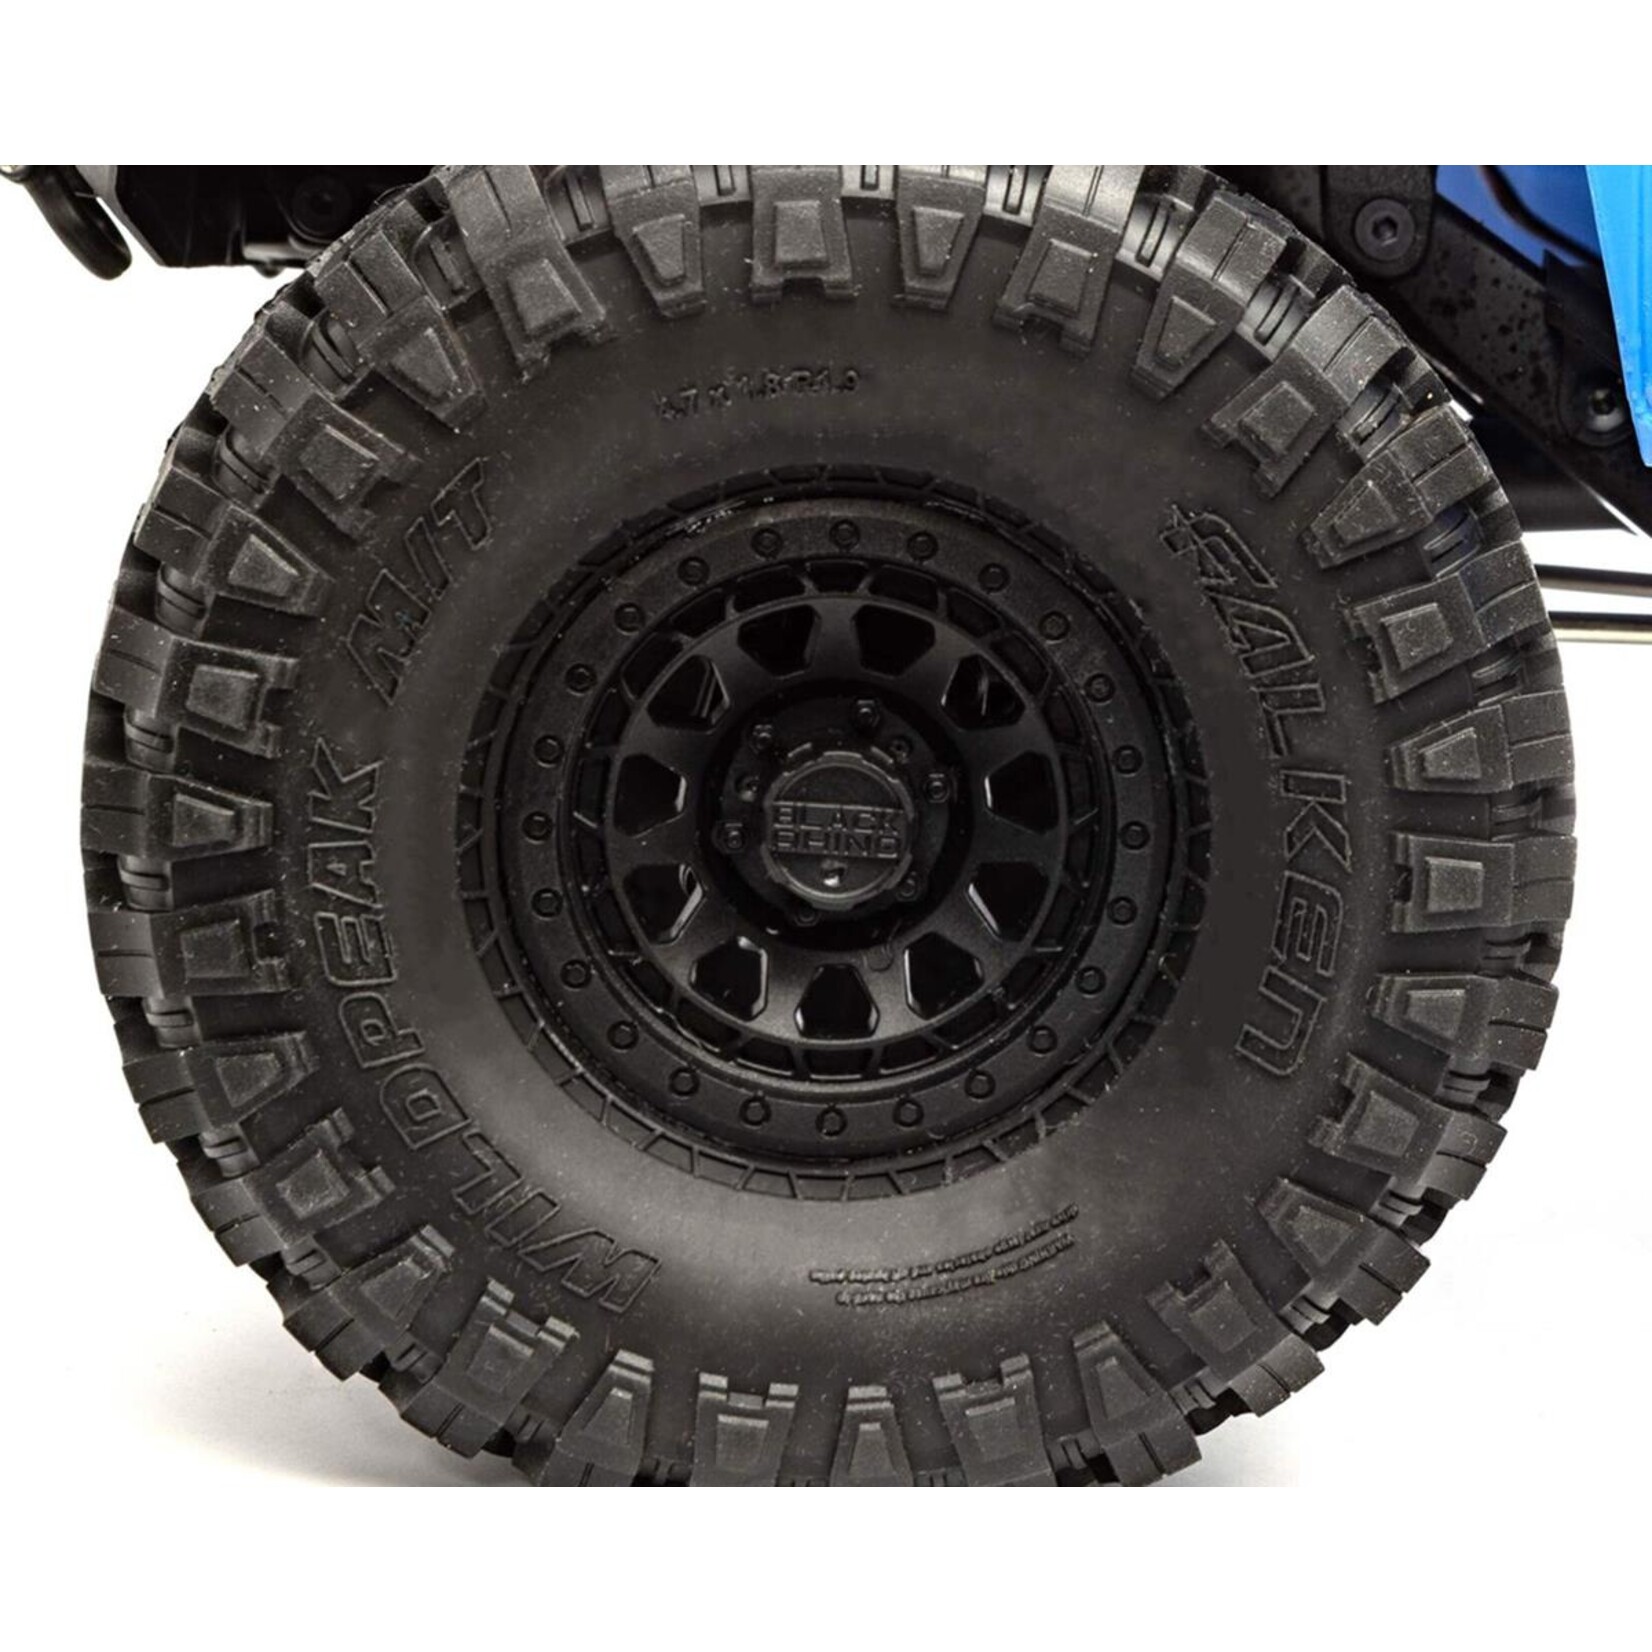 Axial Axial 1/10 SCX10 III Base Camp 4WD Rock Crawler Brushed RTR, Green #AXI03027T2